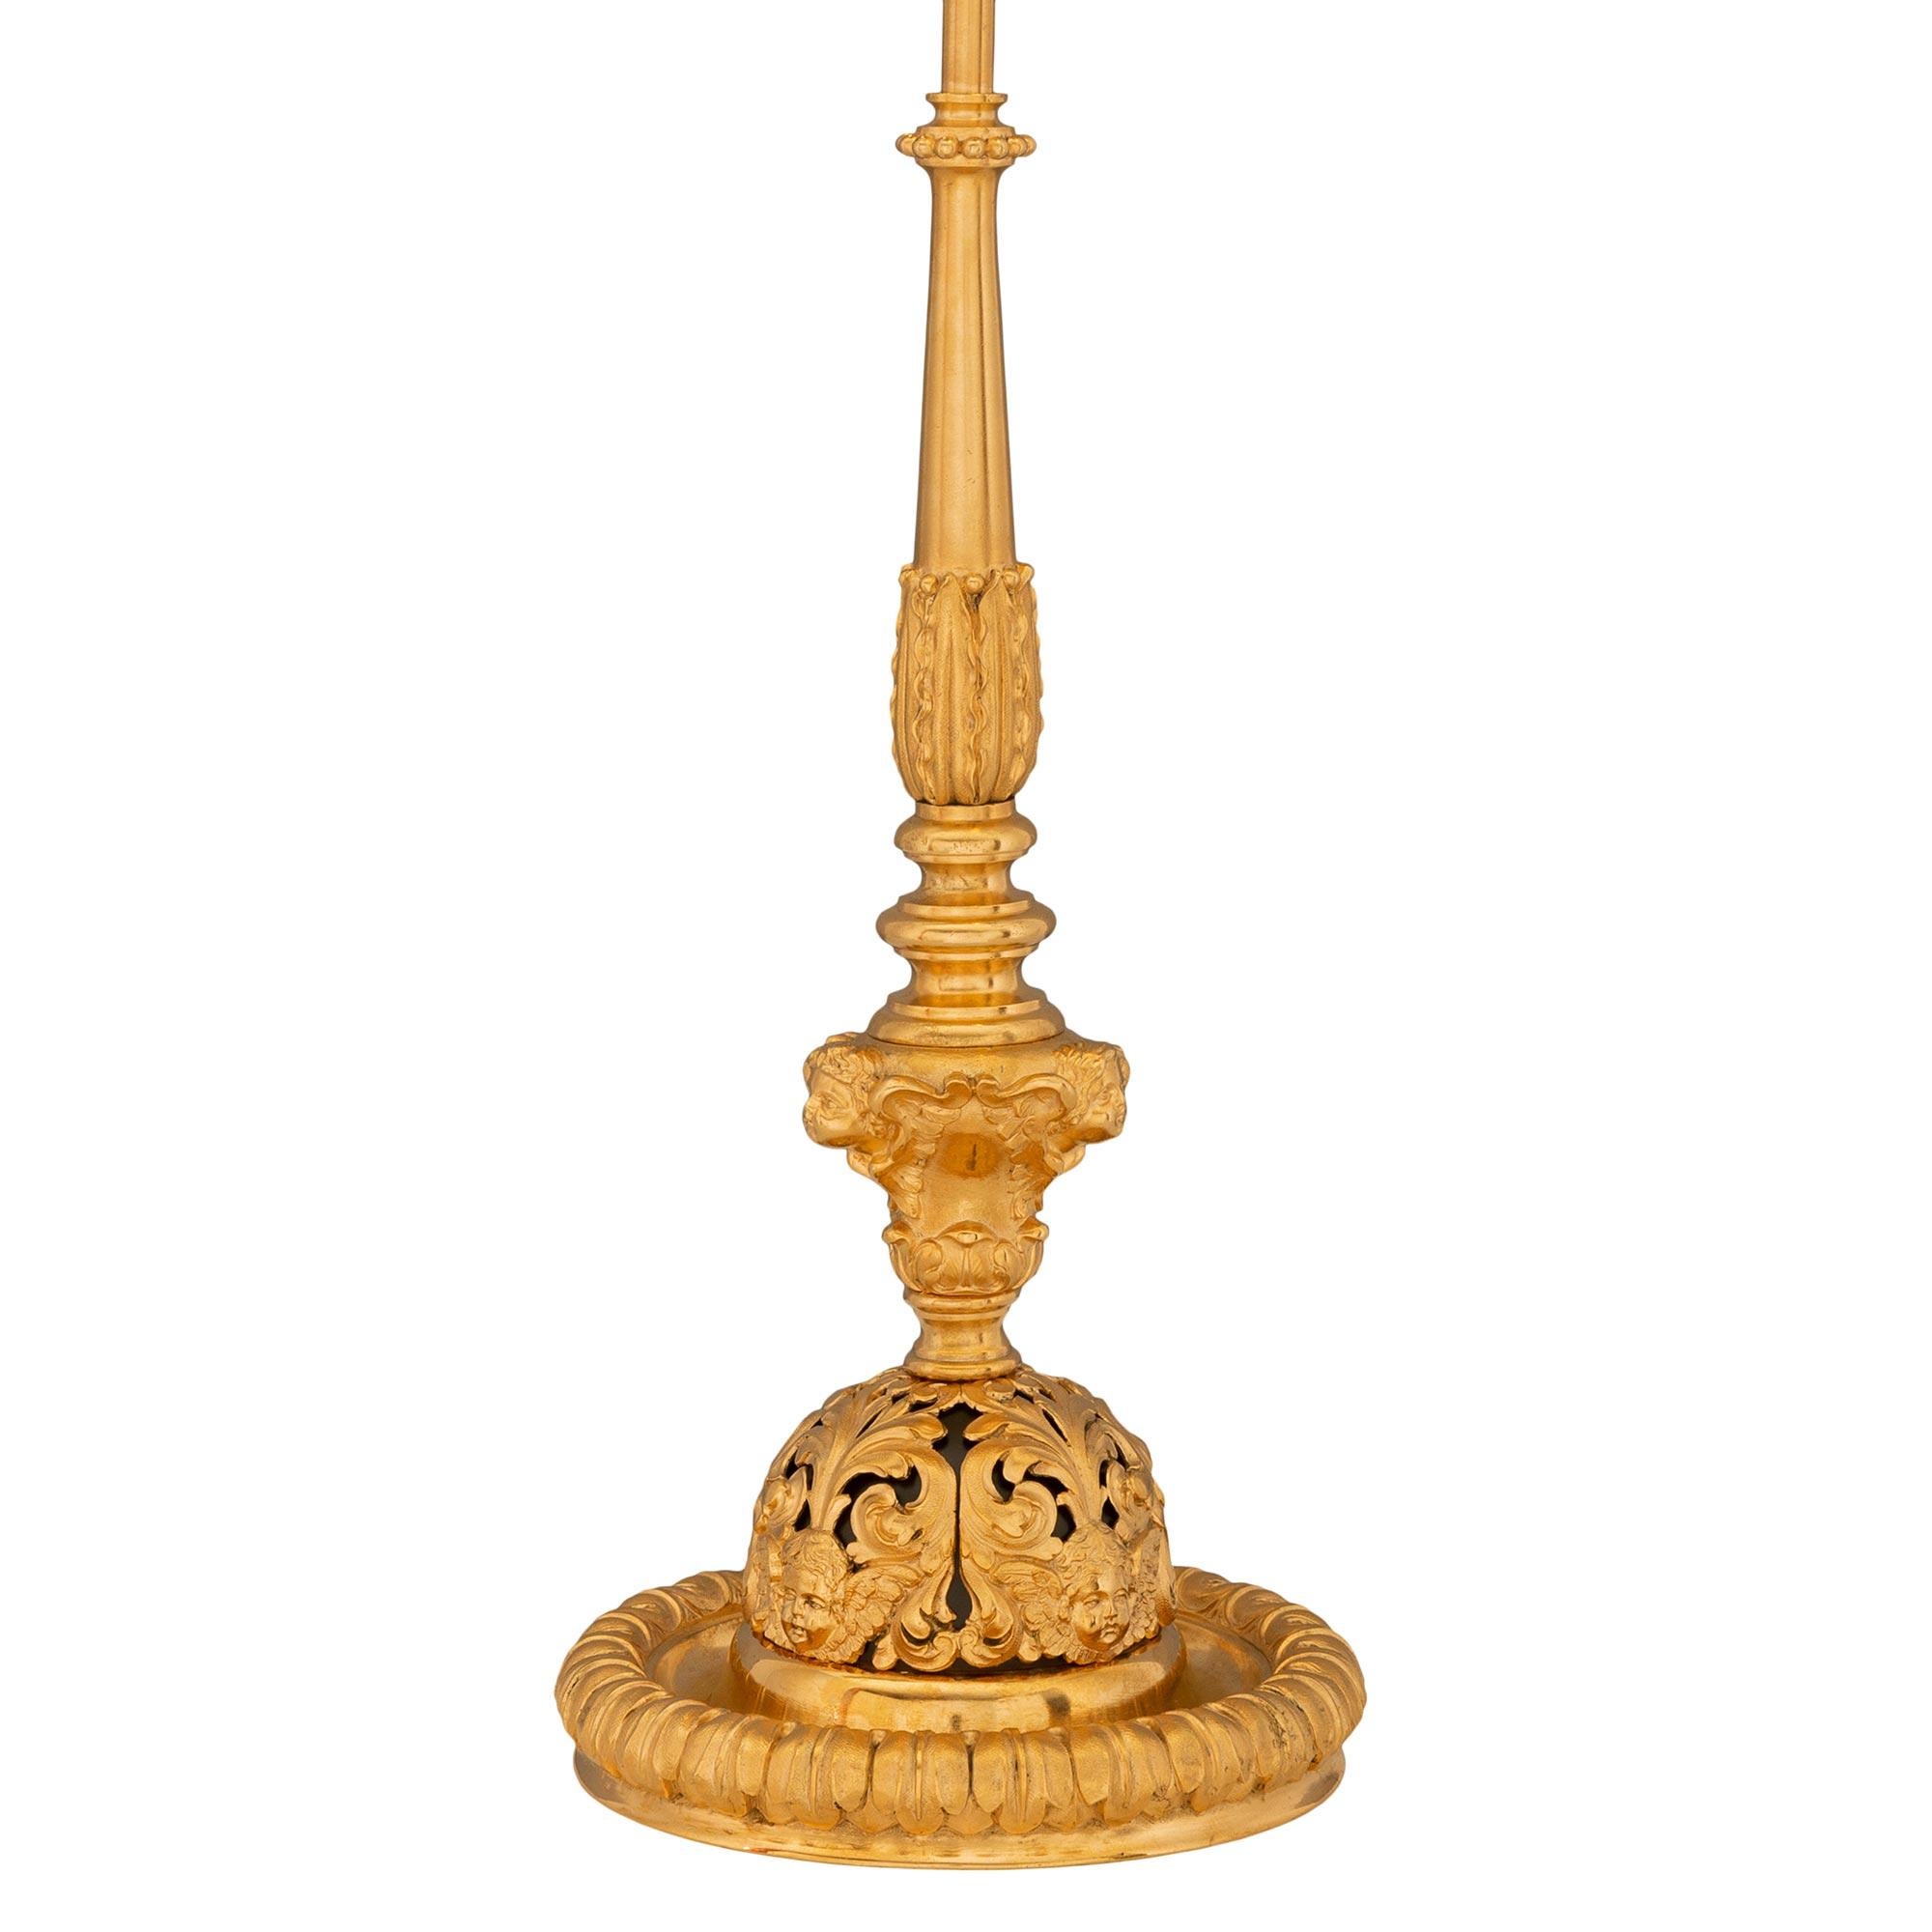 A beautiful French 19th century Renaissance st. ormolu lamp. The lamp is raised by a lovely circular base with a fine wrap around foliate band below the pierced dome shape support displaying scrolled foliate movements and charming richly chased